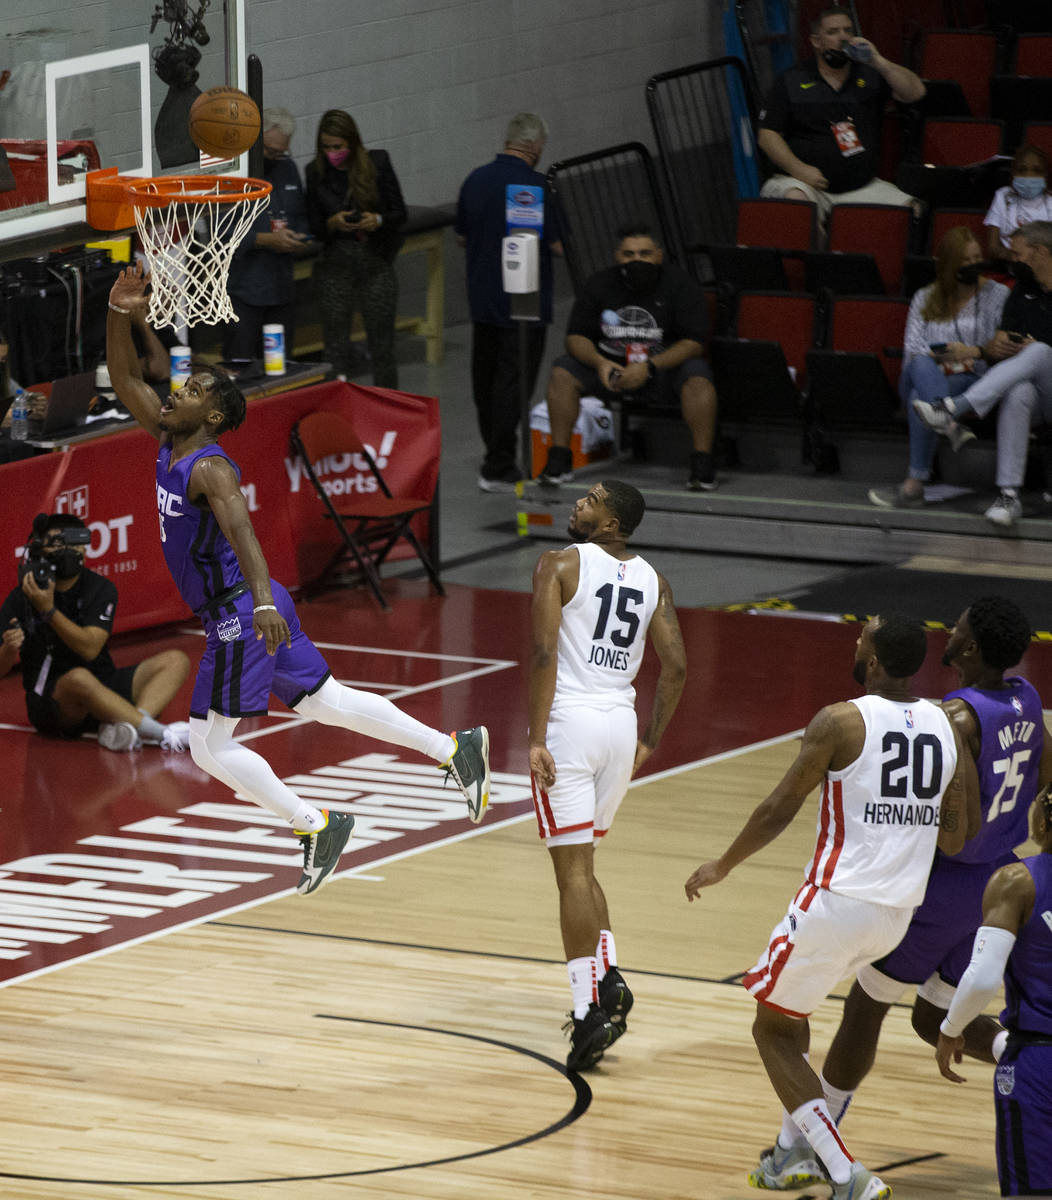 Sacramento Kings guard Davion Mitchell (15) jumps for a layup during the first half of an NBA S ...